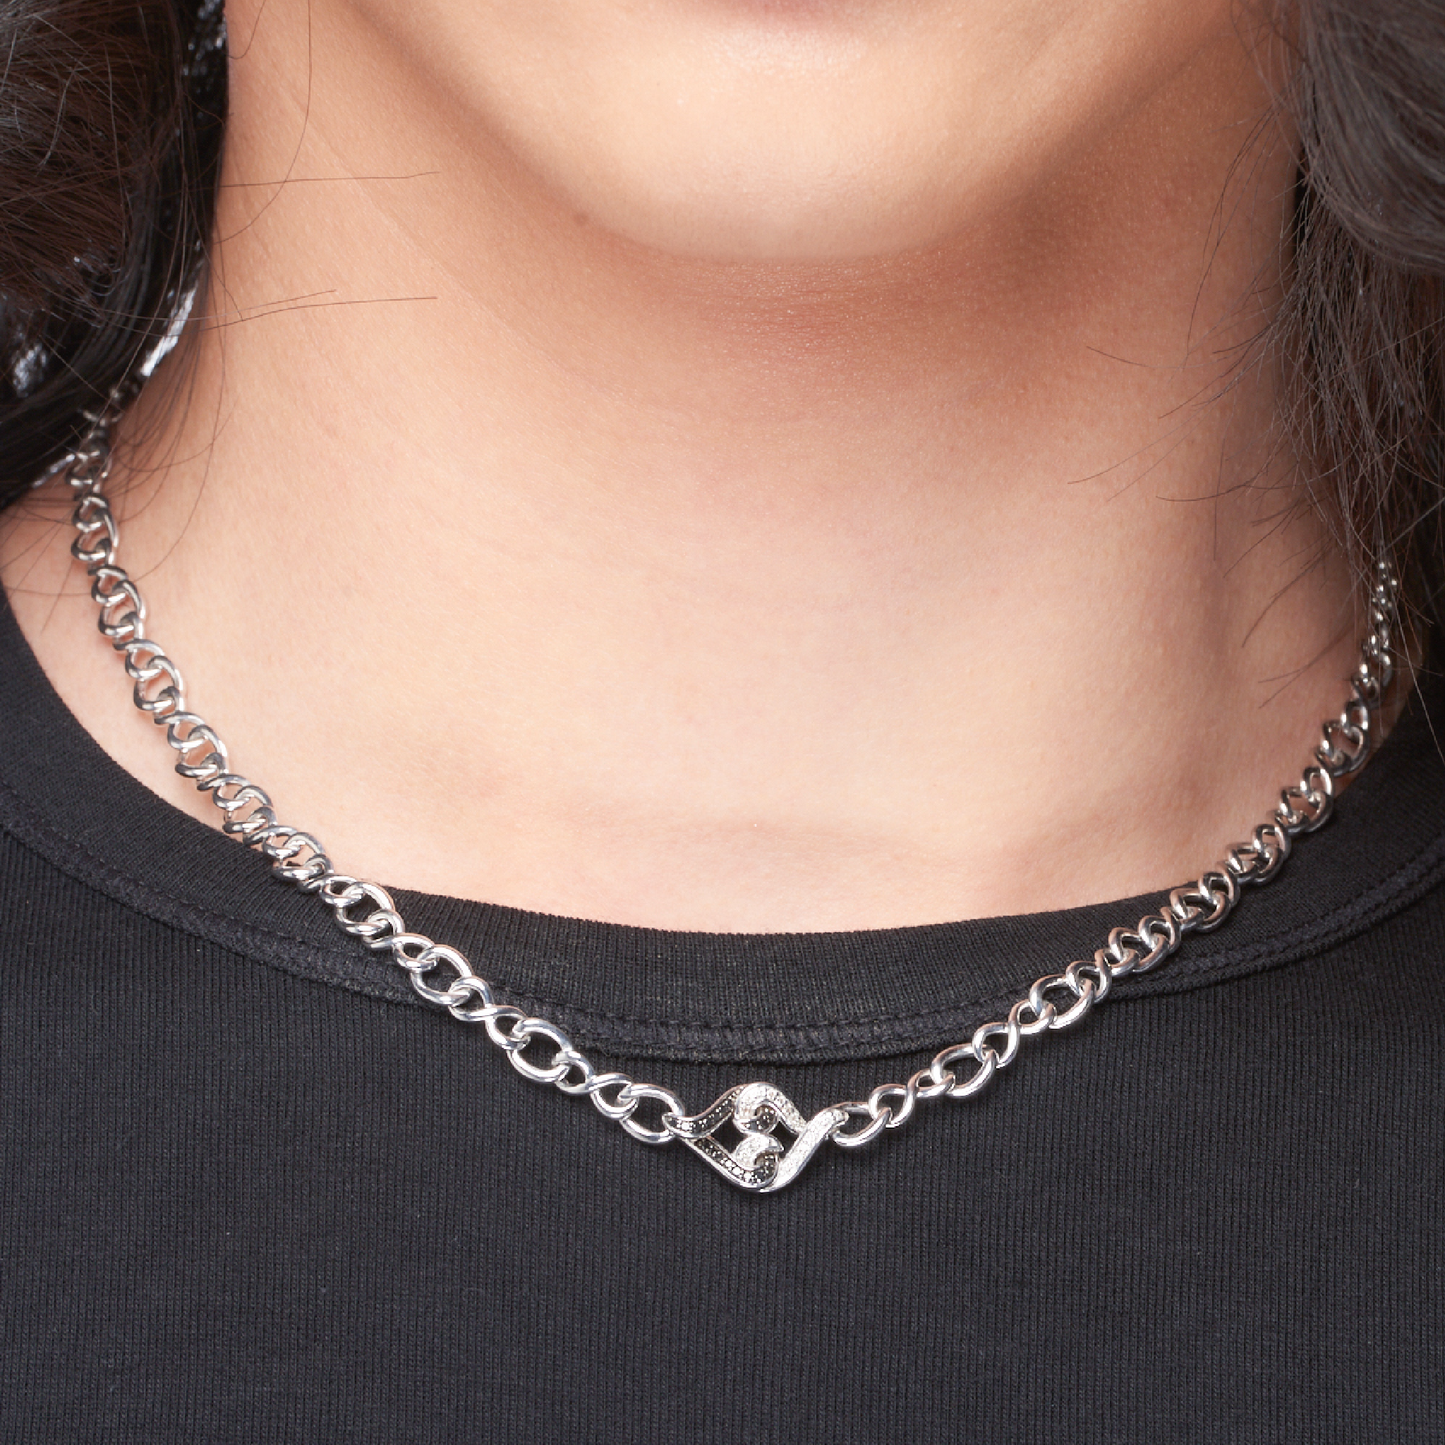 Black Sapphire Necklace | Silver Chain Necklace with Black and White Sapphires by Lolovivi